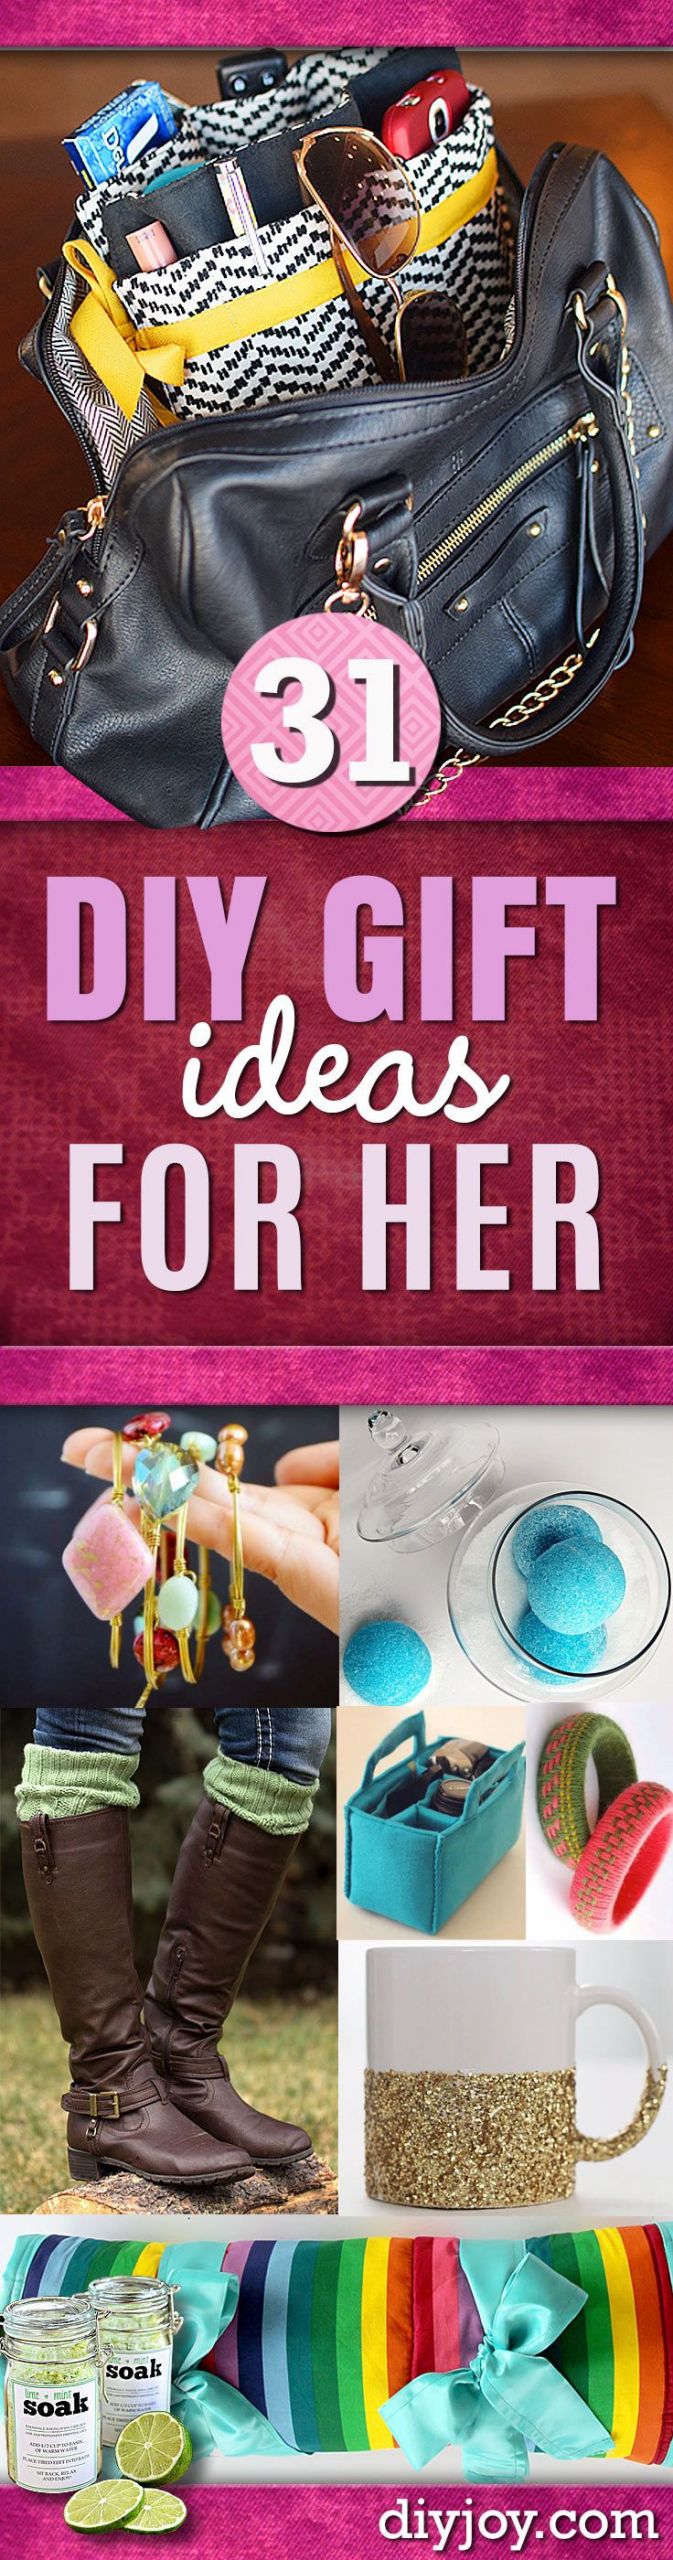 Inexpensive Birthday Gifts For Her
 DIY Gift Ideas for Her